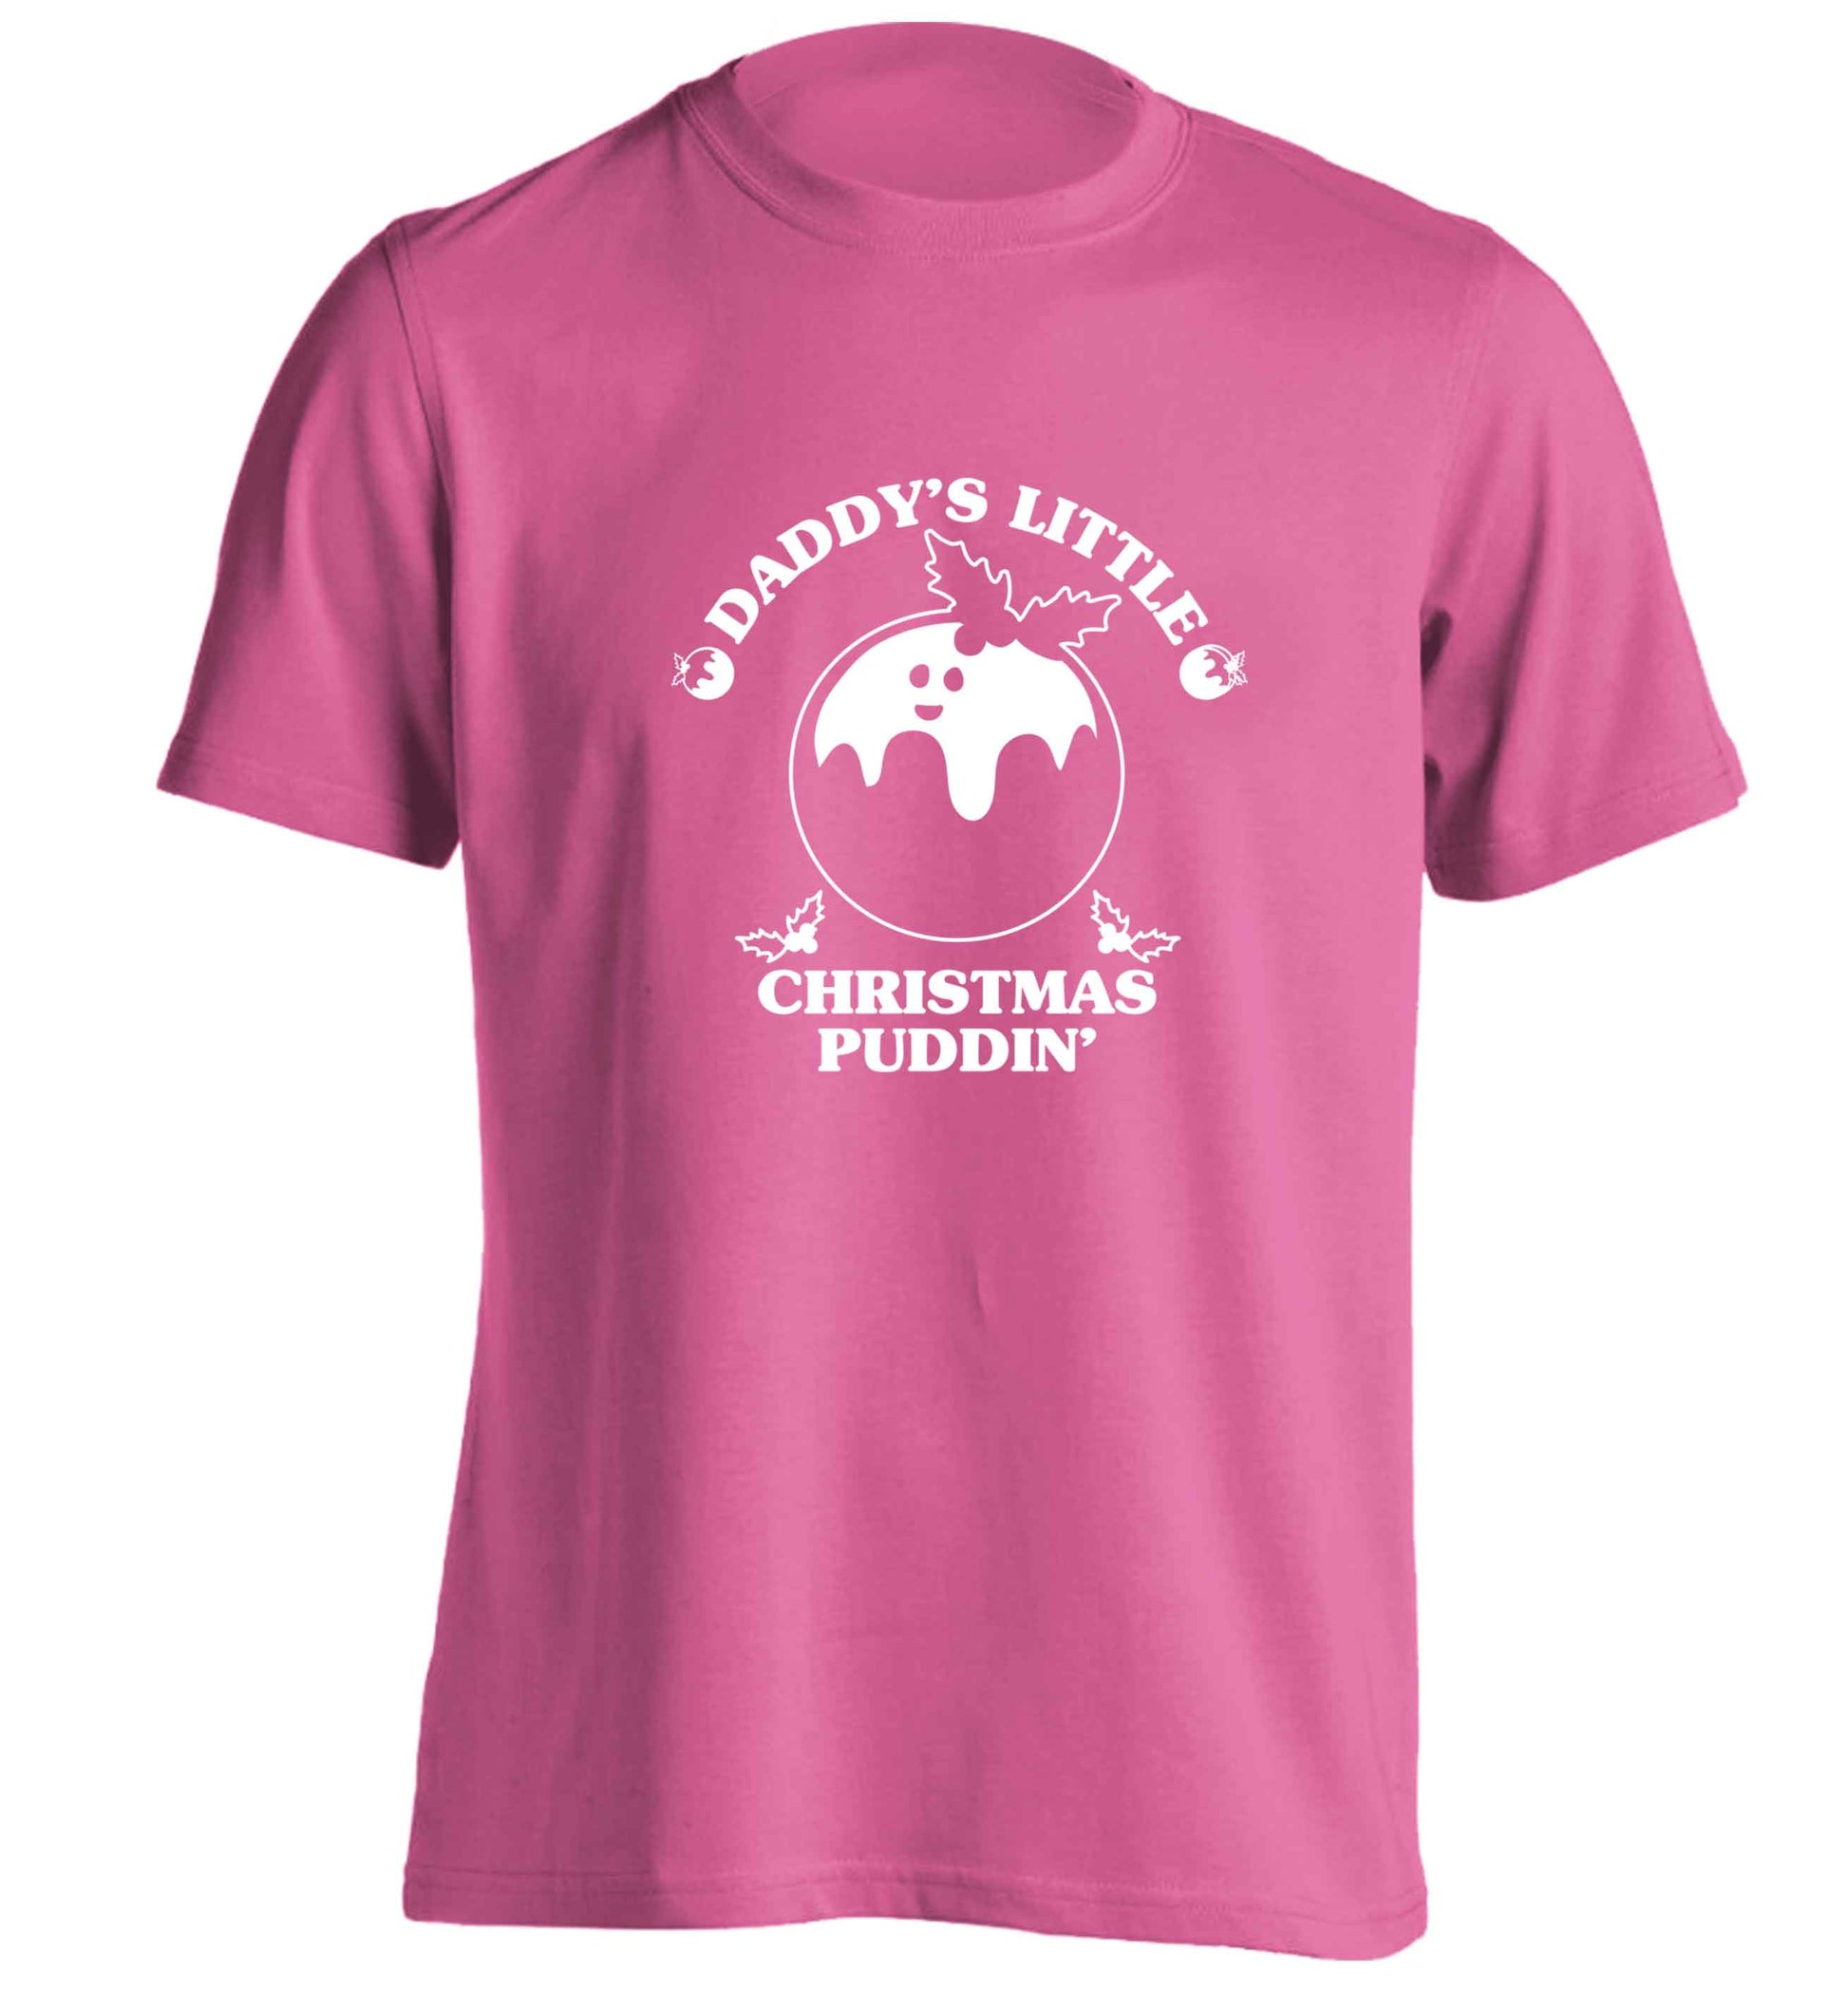 Daddy's little Christmas puddin' adults unisex pink Tshirt 2XL